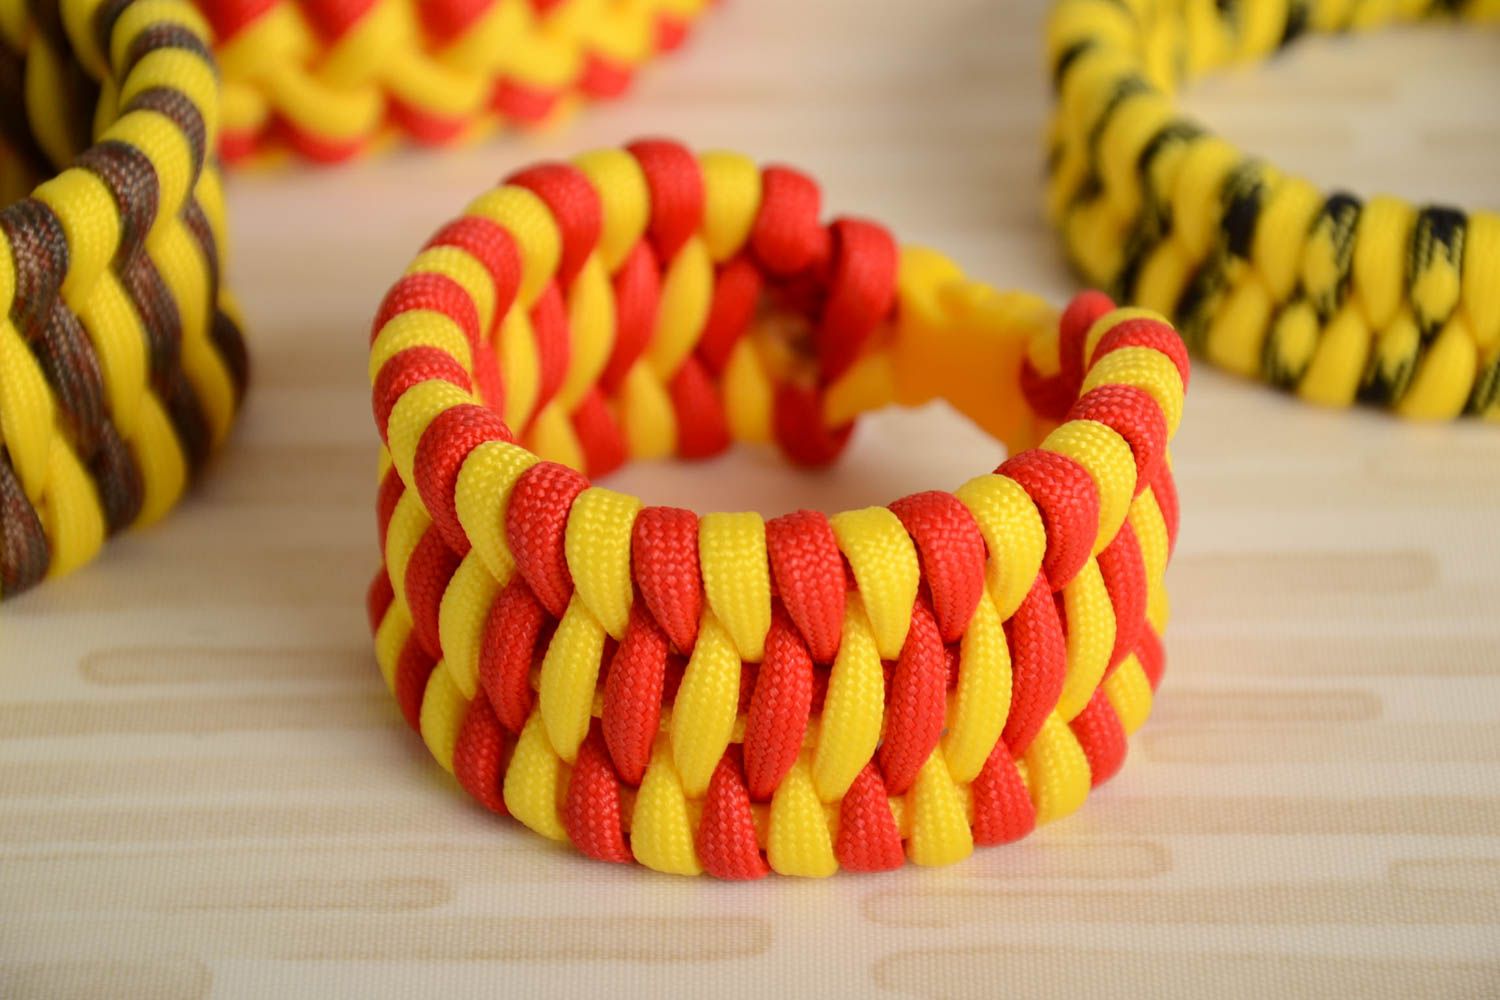 Handmade wide survival wrist bracelet woven of yellow and red paracords unisex photo 1